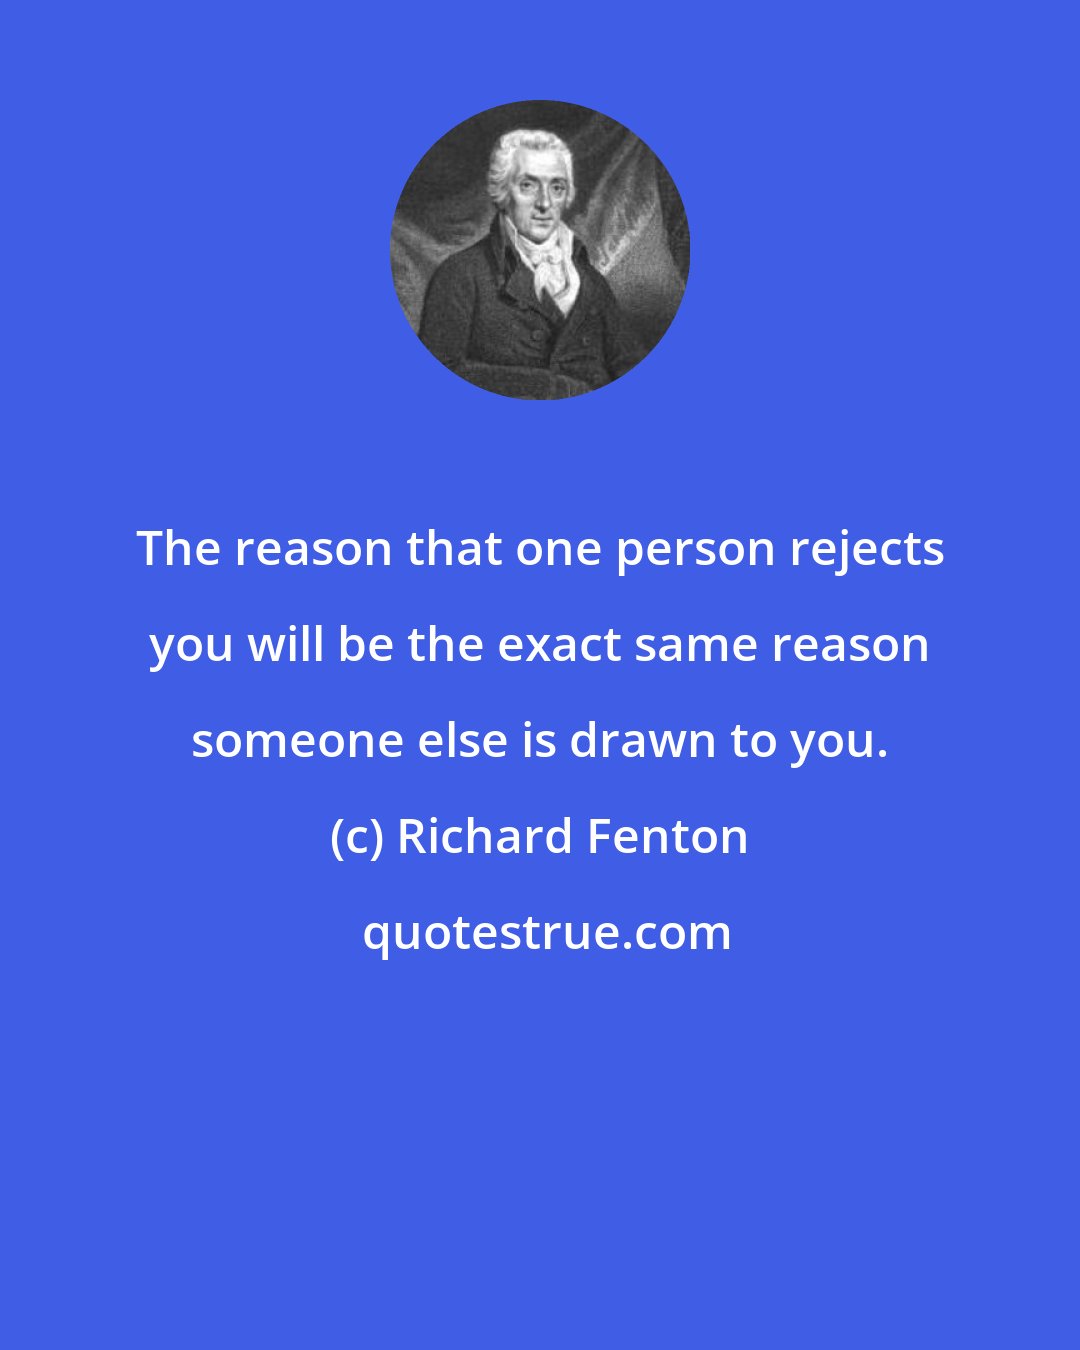 Richard Fenton: The reason that one person rejects you will be the exact same reason someone else is drawn to you.